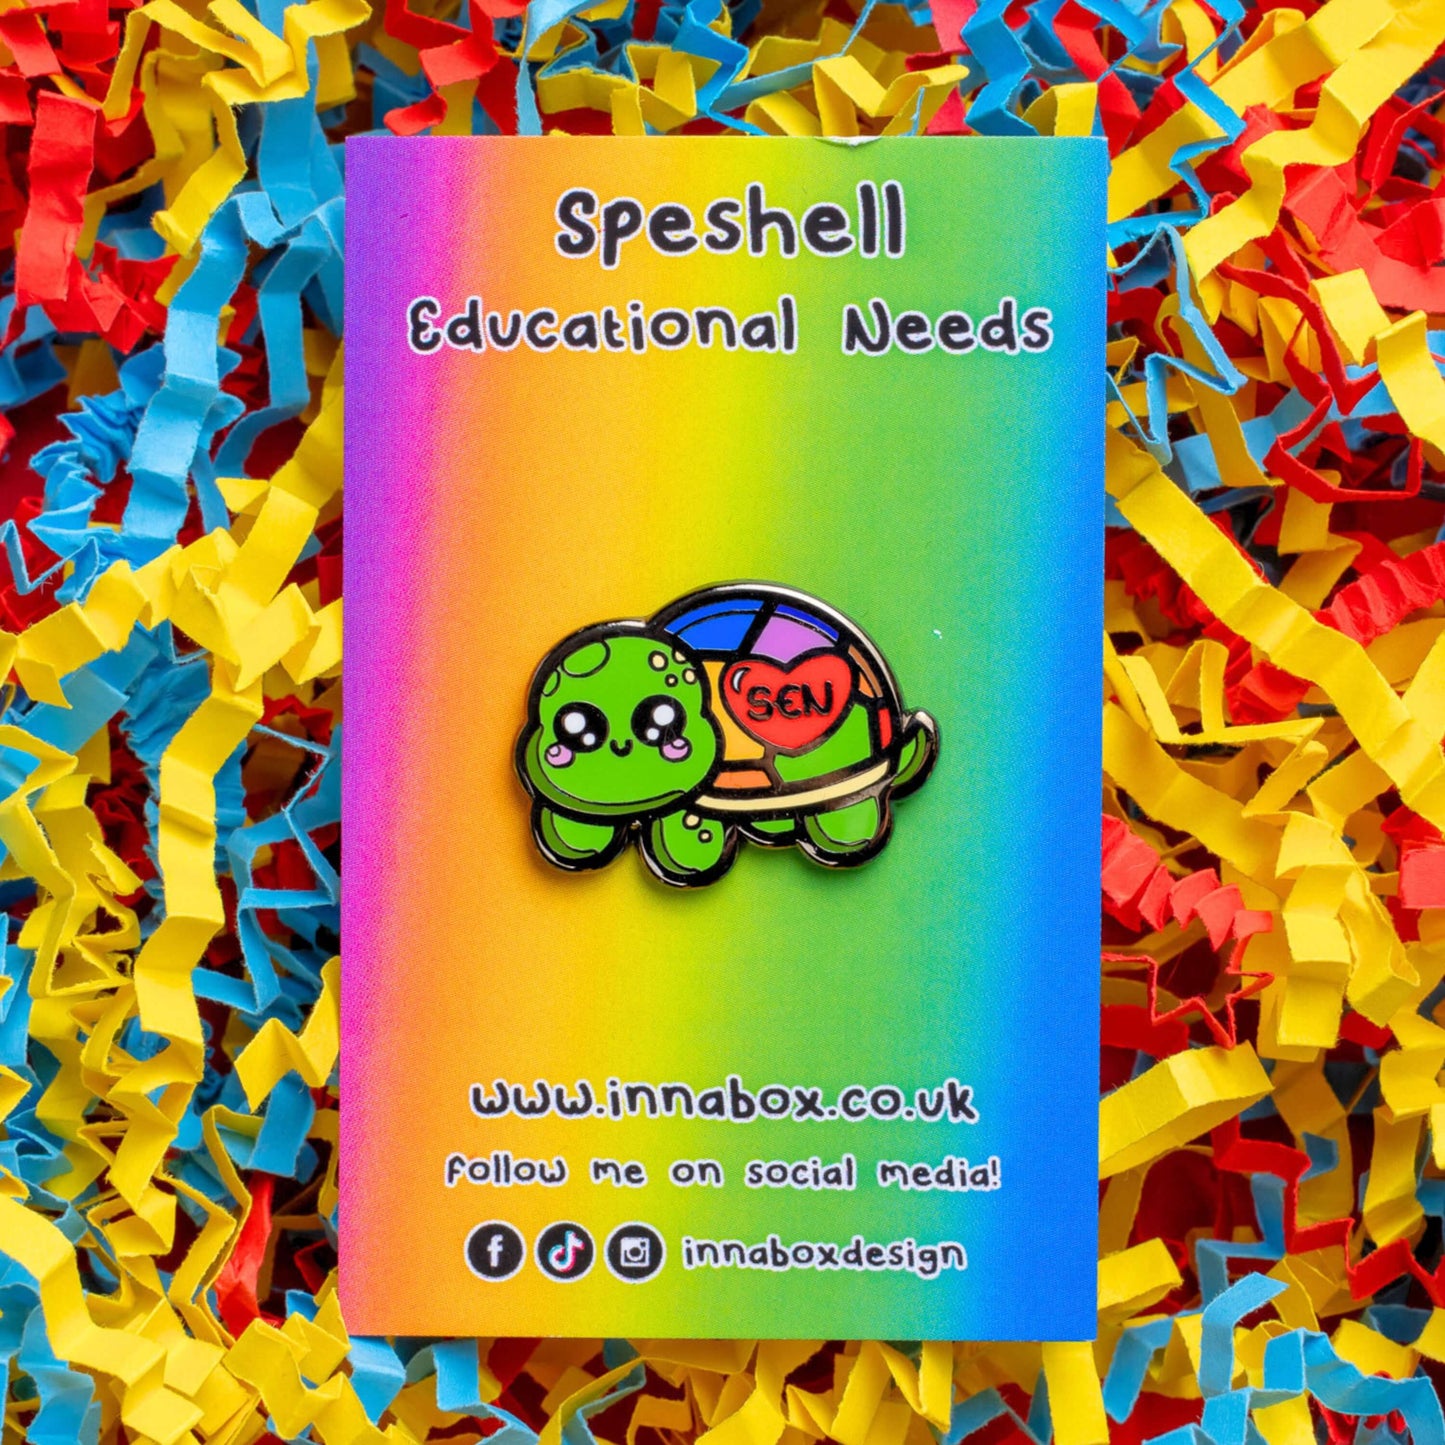 The Speshell Educational Needs Enamel Pin - SEN - Special Educational Needs on a rainbow backing card laid on a red, yellow and blue card confetti background. A rainbow shell kawaii cute style tortoise with pink cheeks and sparkling eyes, on its shell is a red heart with 'SEN' in the middle. The pin design is raising awareness for SEN Special Educational Needs.